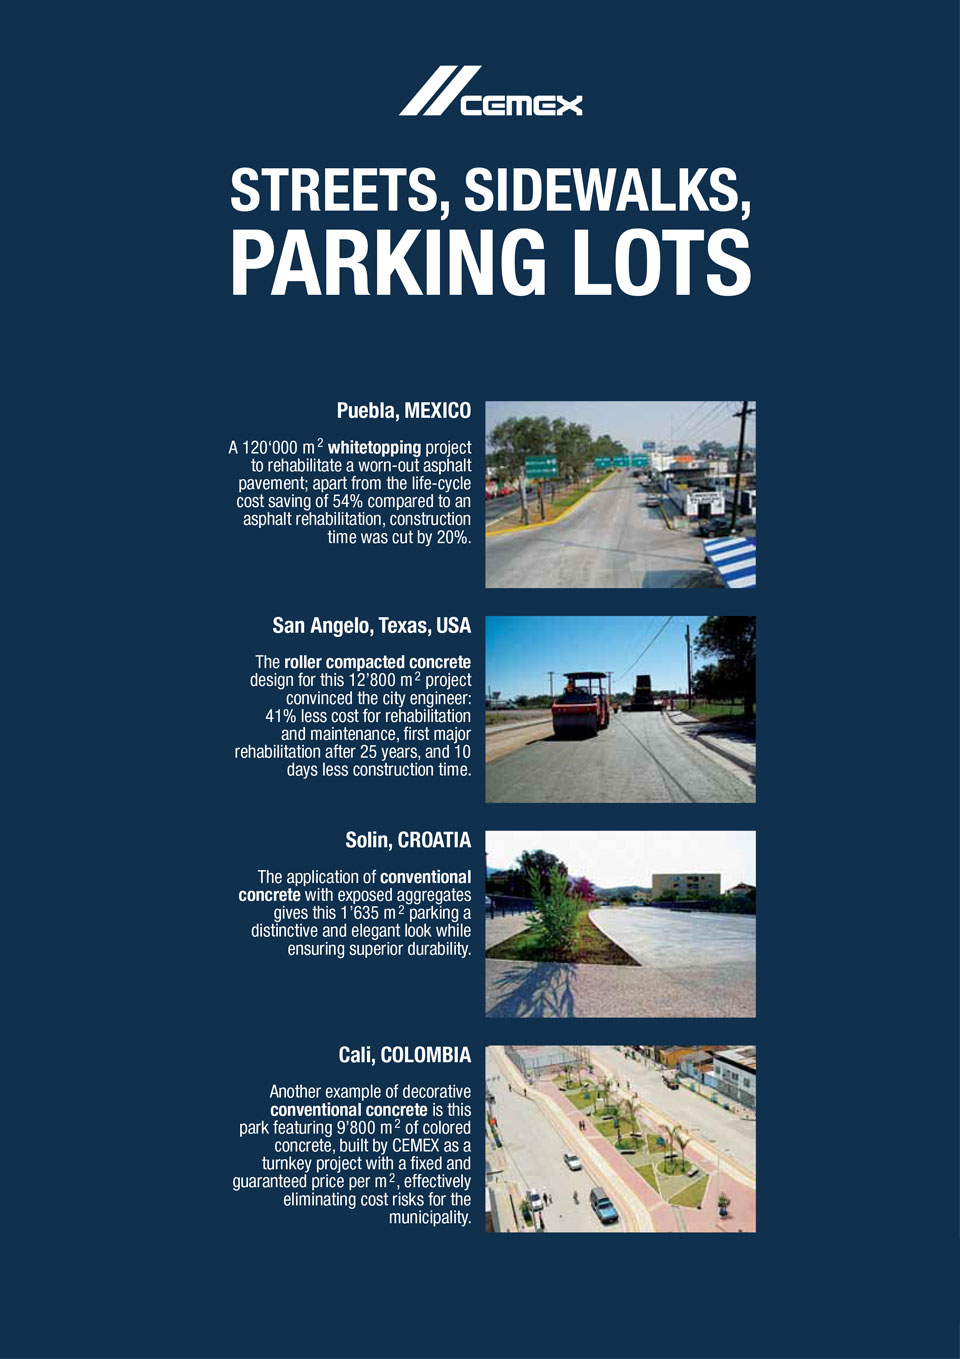 the image shows several streets, sidewalks, and parking lots CEMEX has helped with the construction of